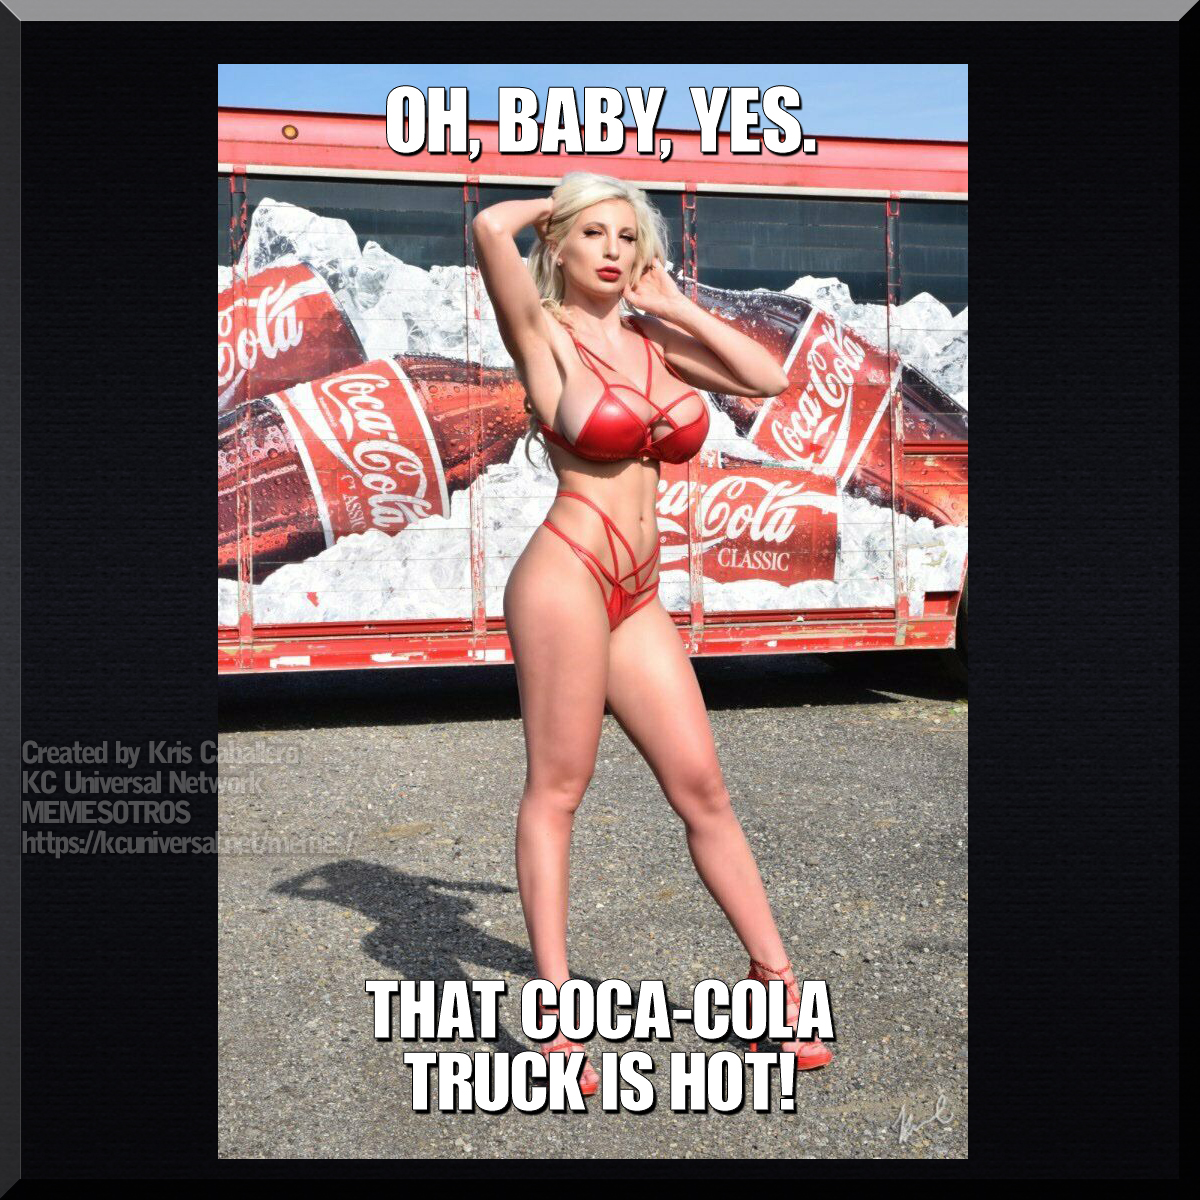 An original meme showing the sexiness of the Coca-Cola truck while 'someone' stands in the way of it.